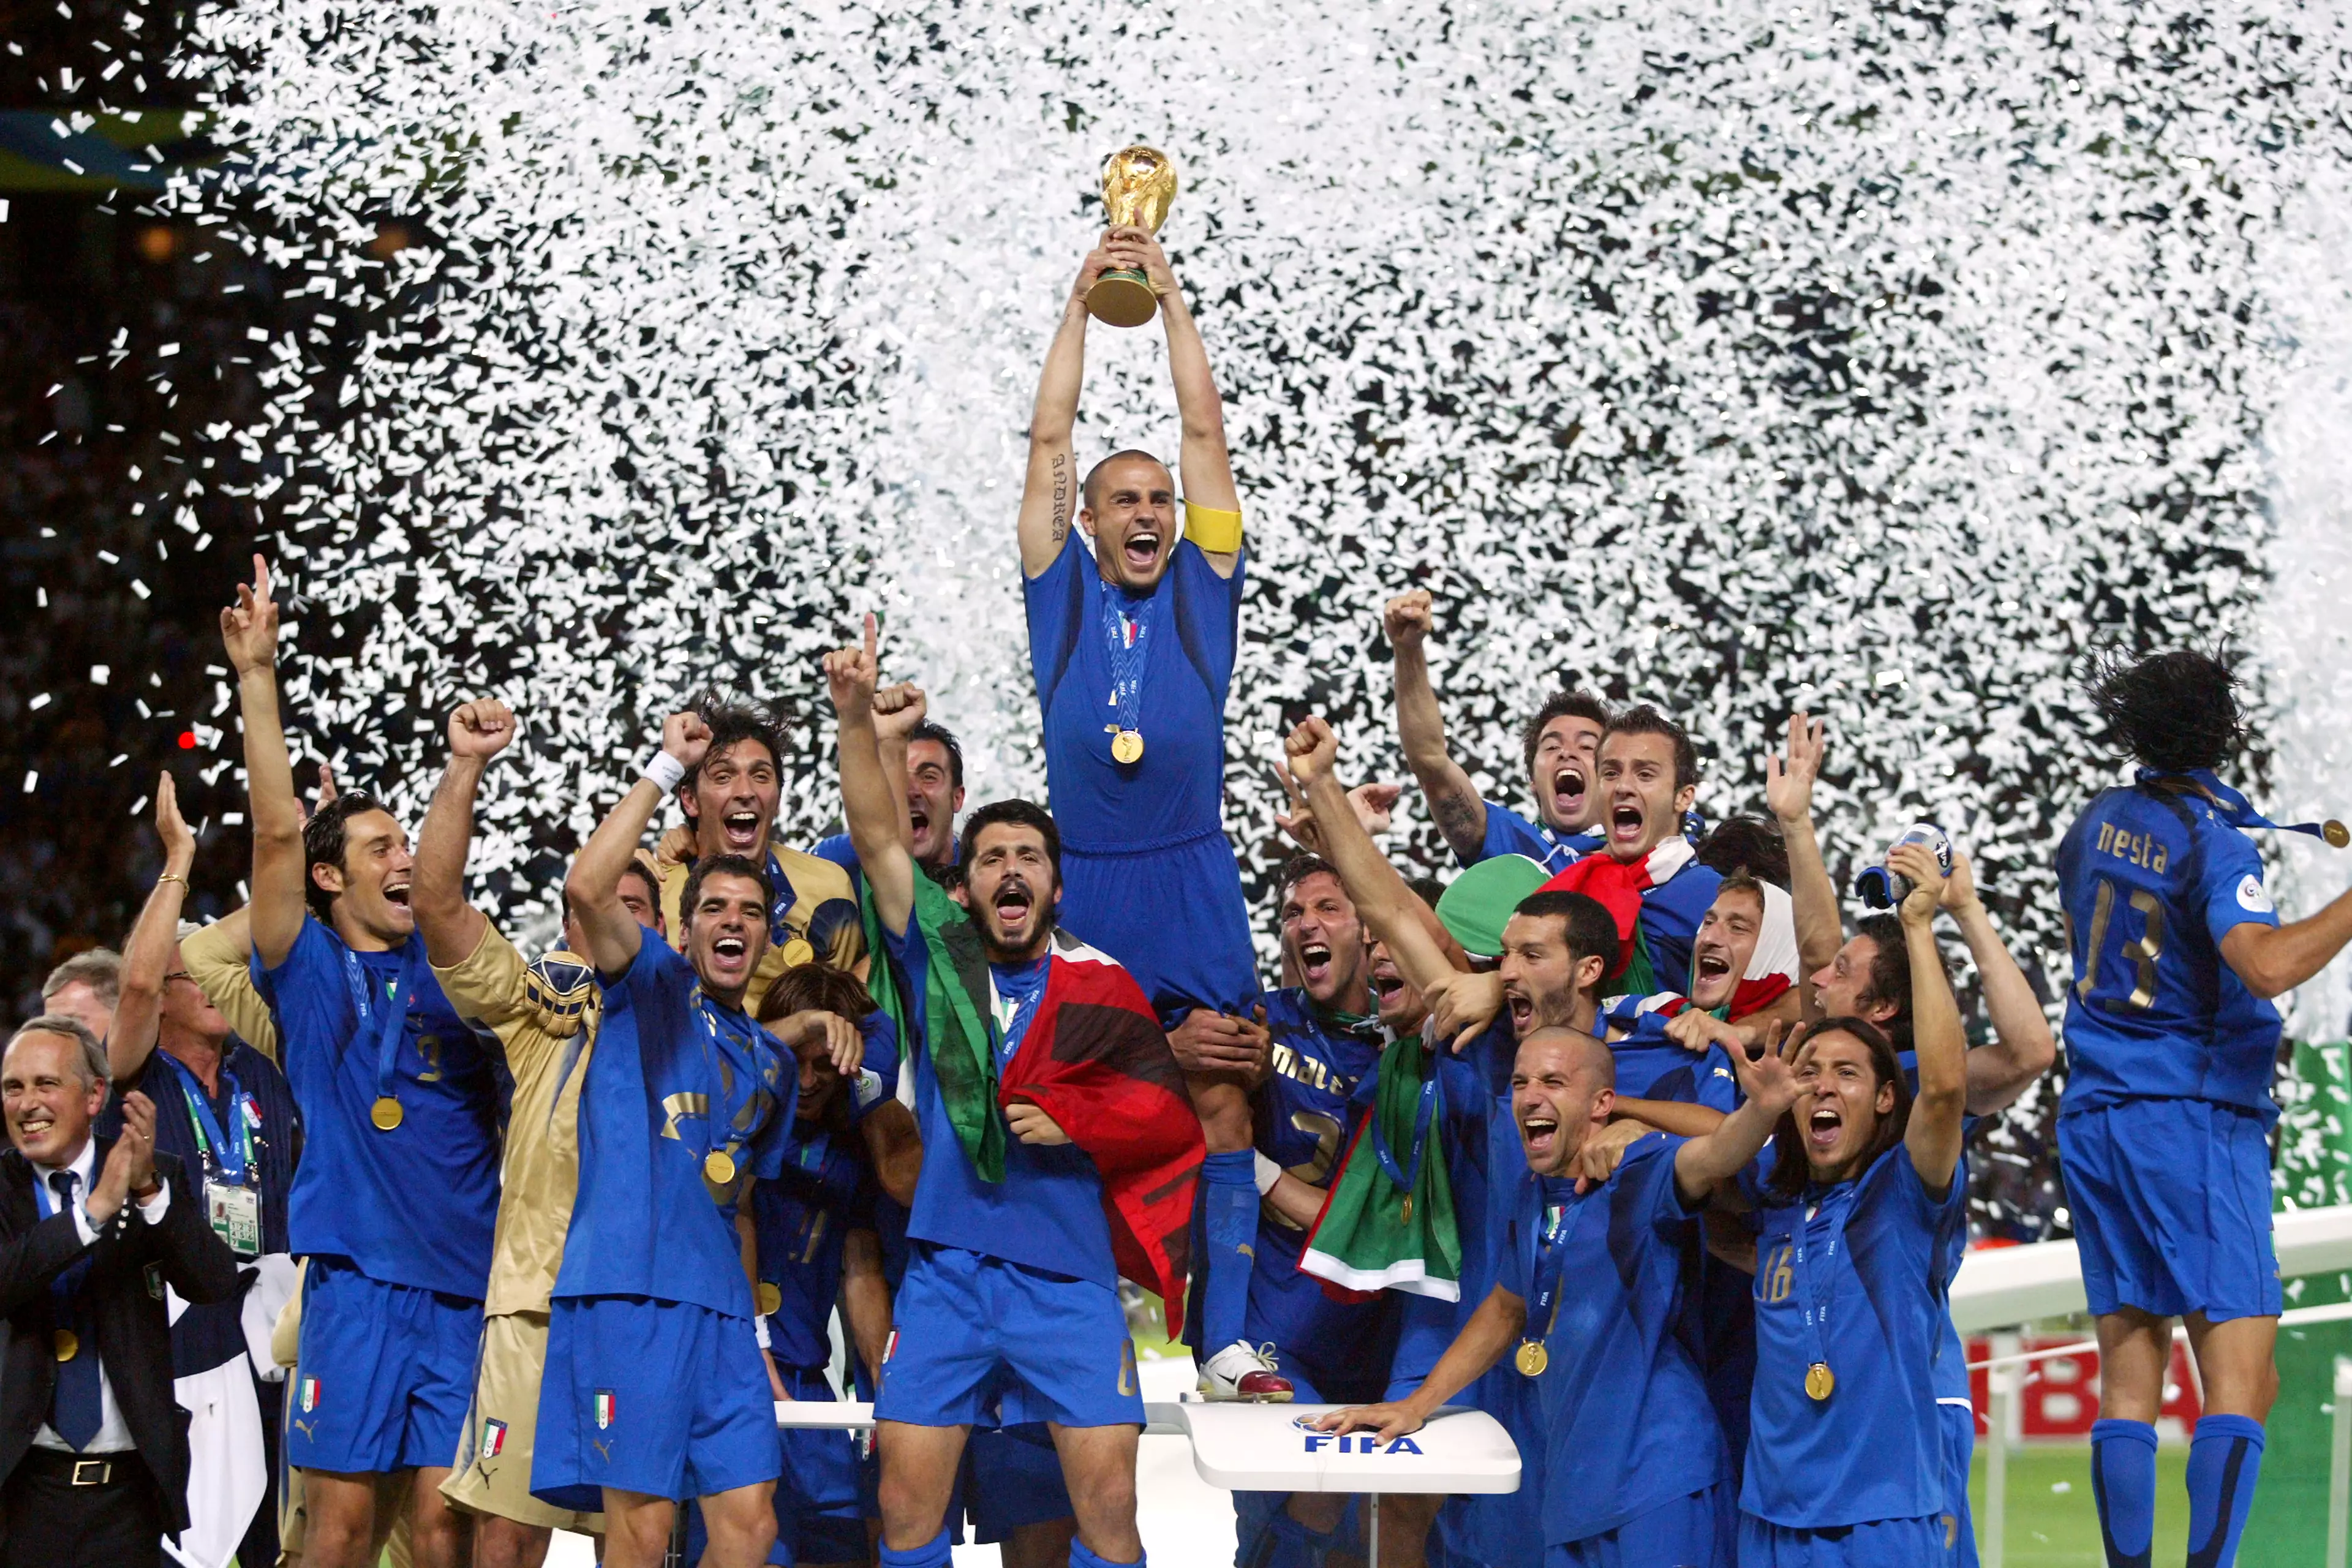 Cannavaro could reprise his role as captain. Image: PA Images